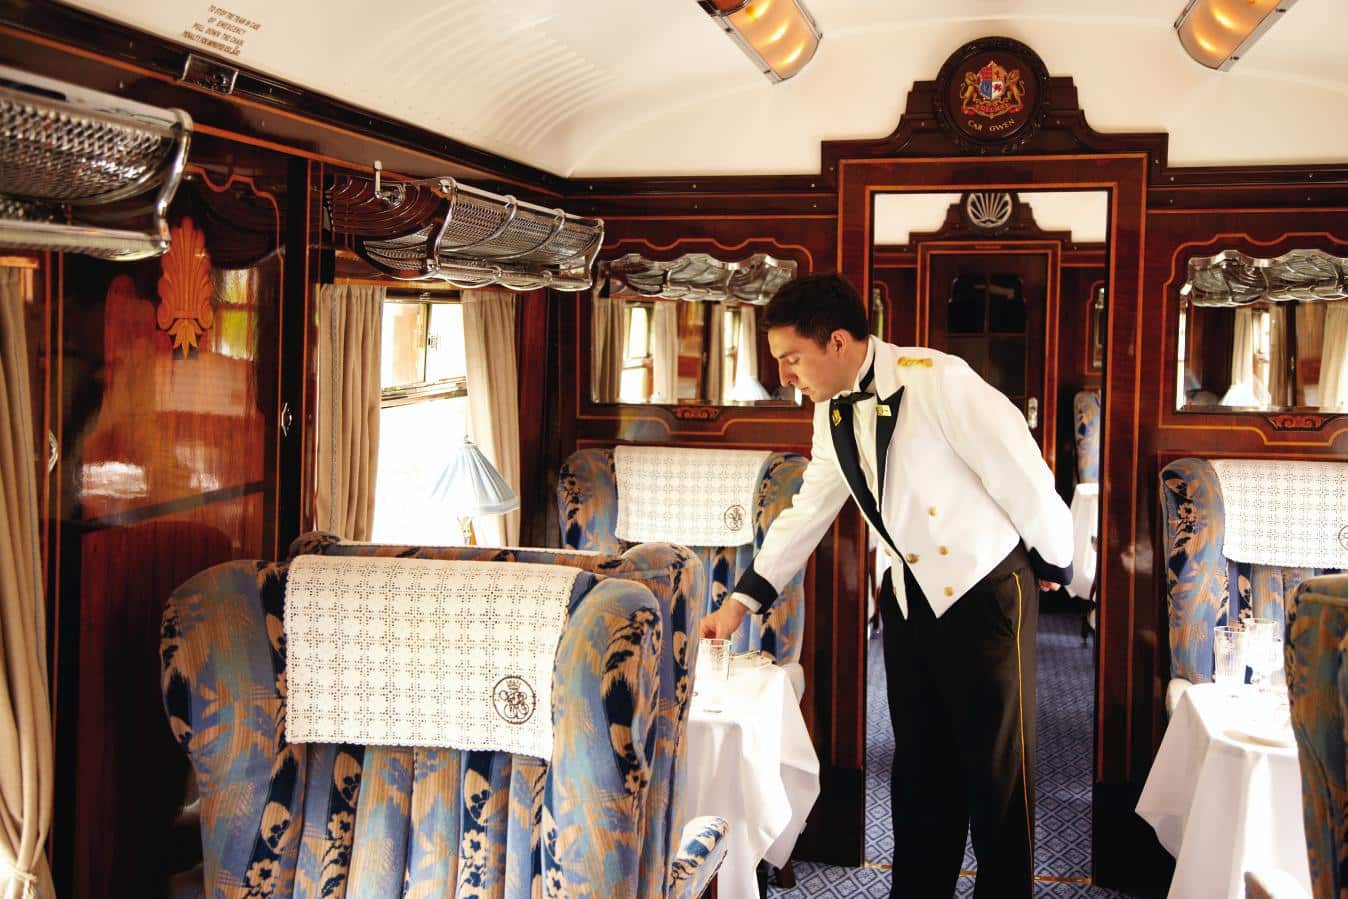 Image of Waiter preparing tables on the Northern Belle